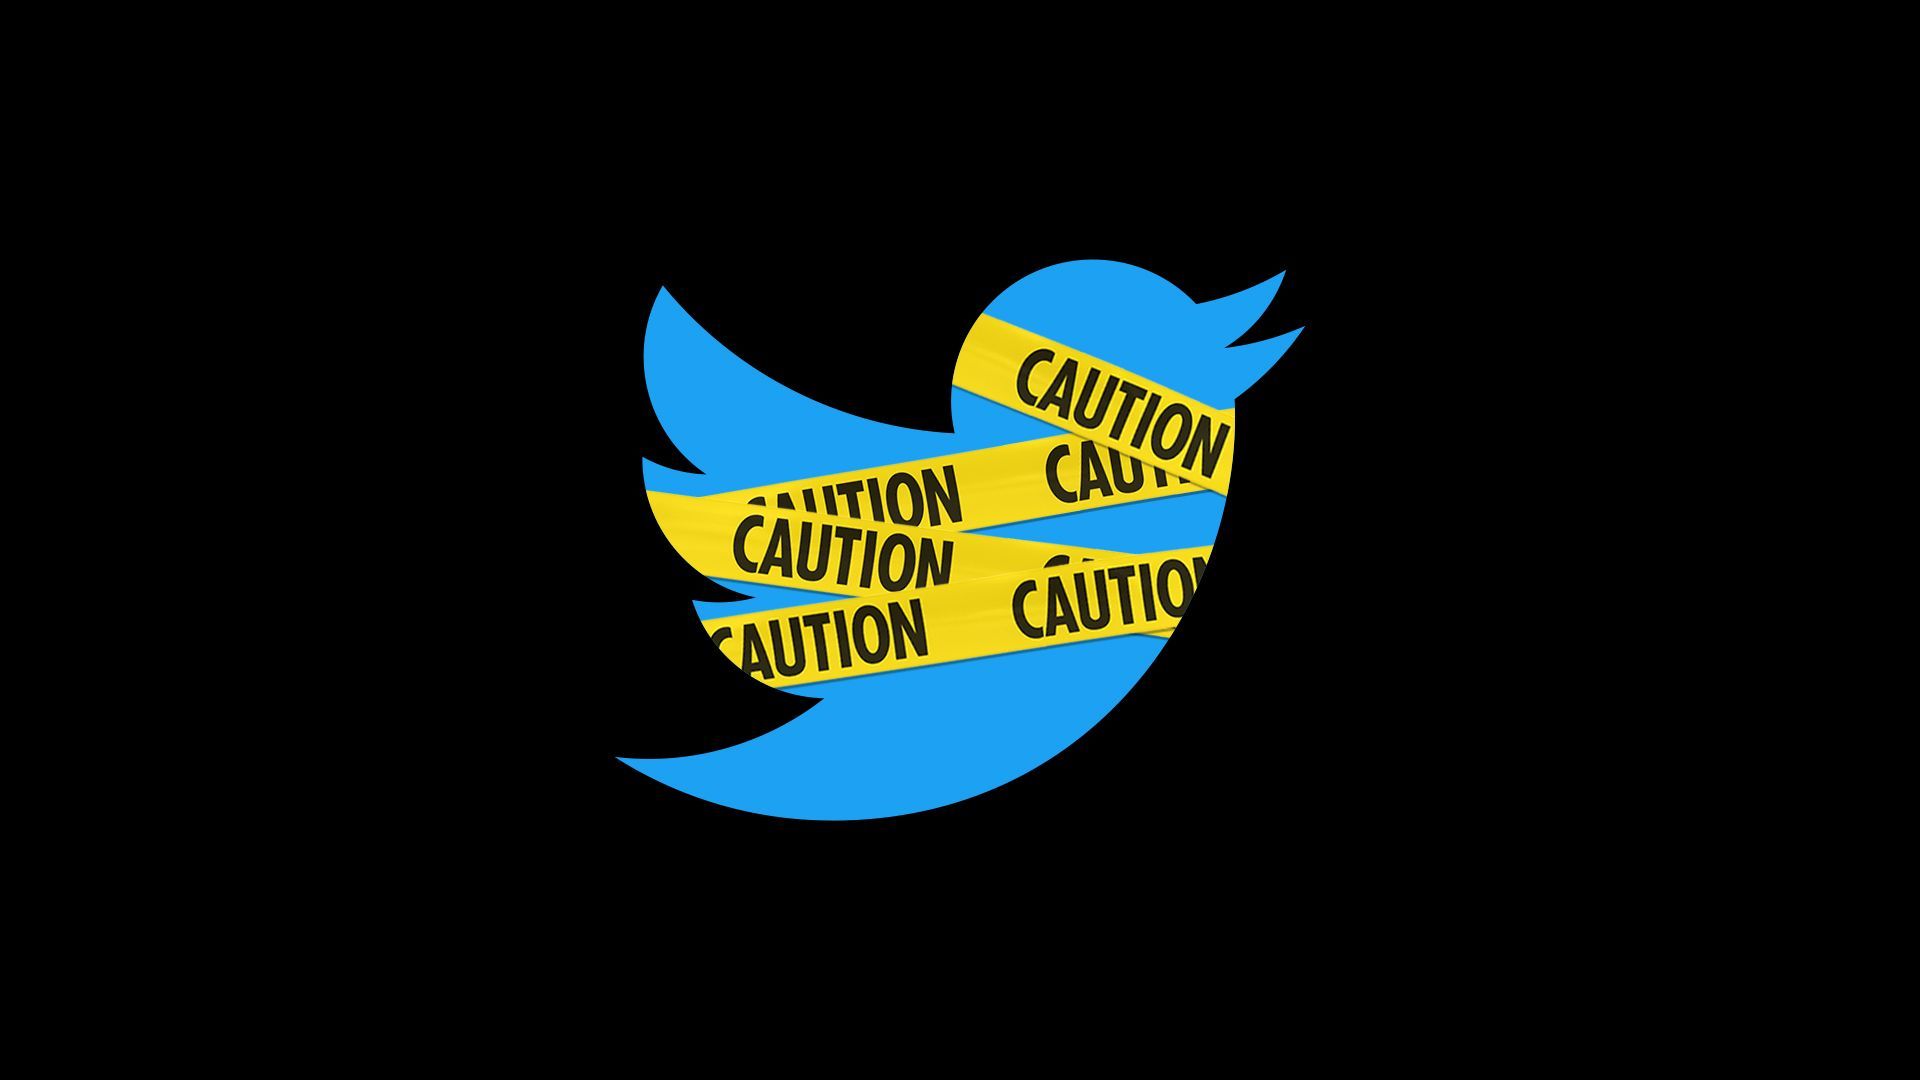 Illustration of twitter logo wrapped in caution tape